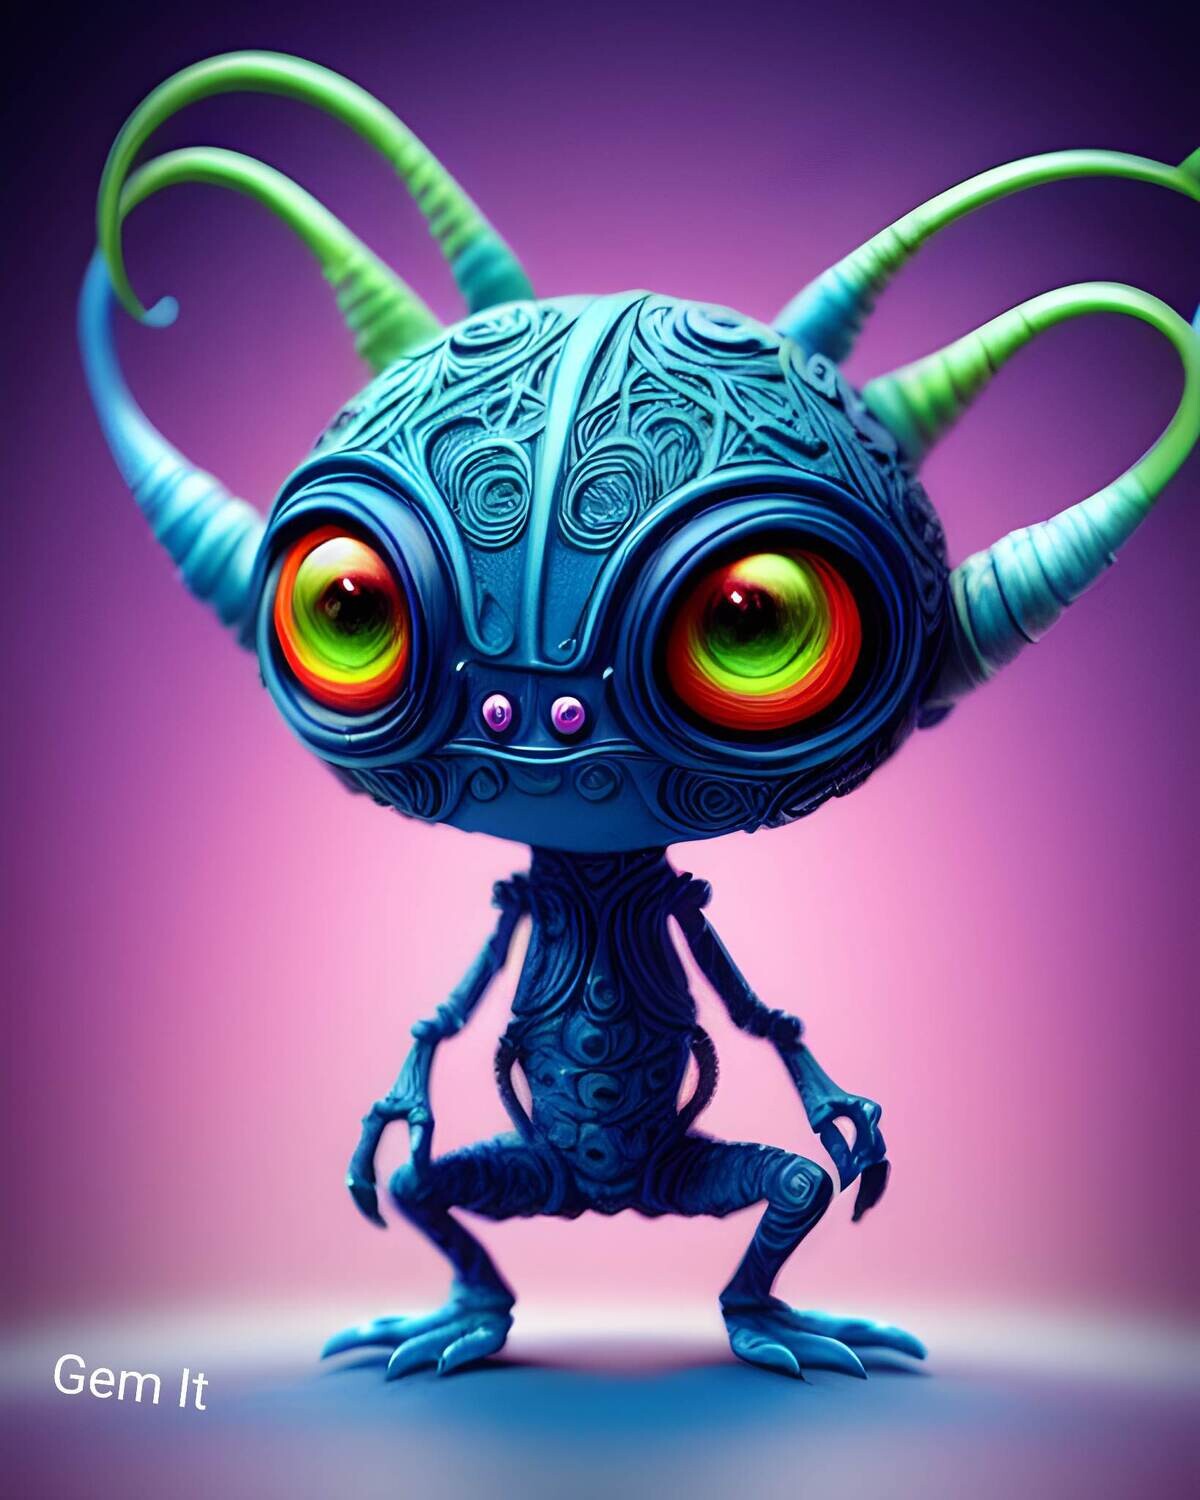 Alien Buddy 2 - Specially ordered for you. Delivery is approximately 4 - 6 weeks.